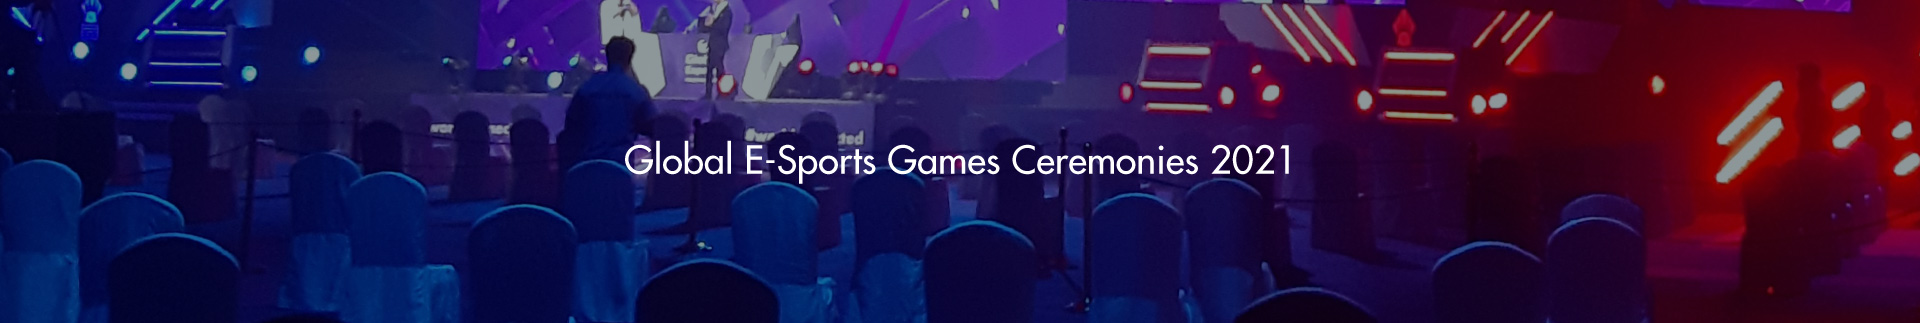 Global E-Sports Games Ceremonies 2021